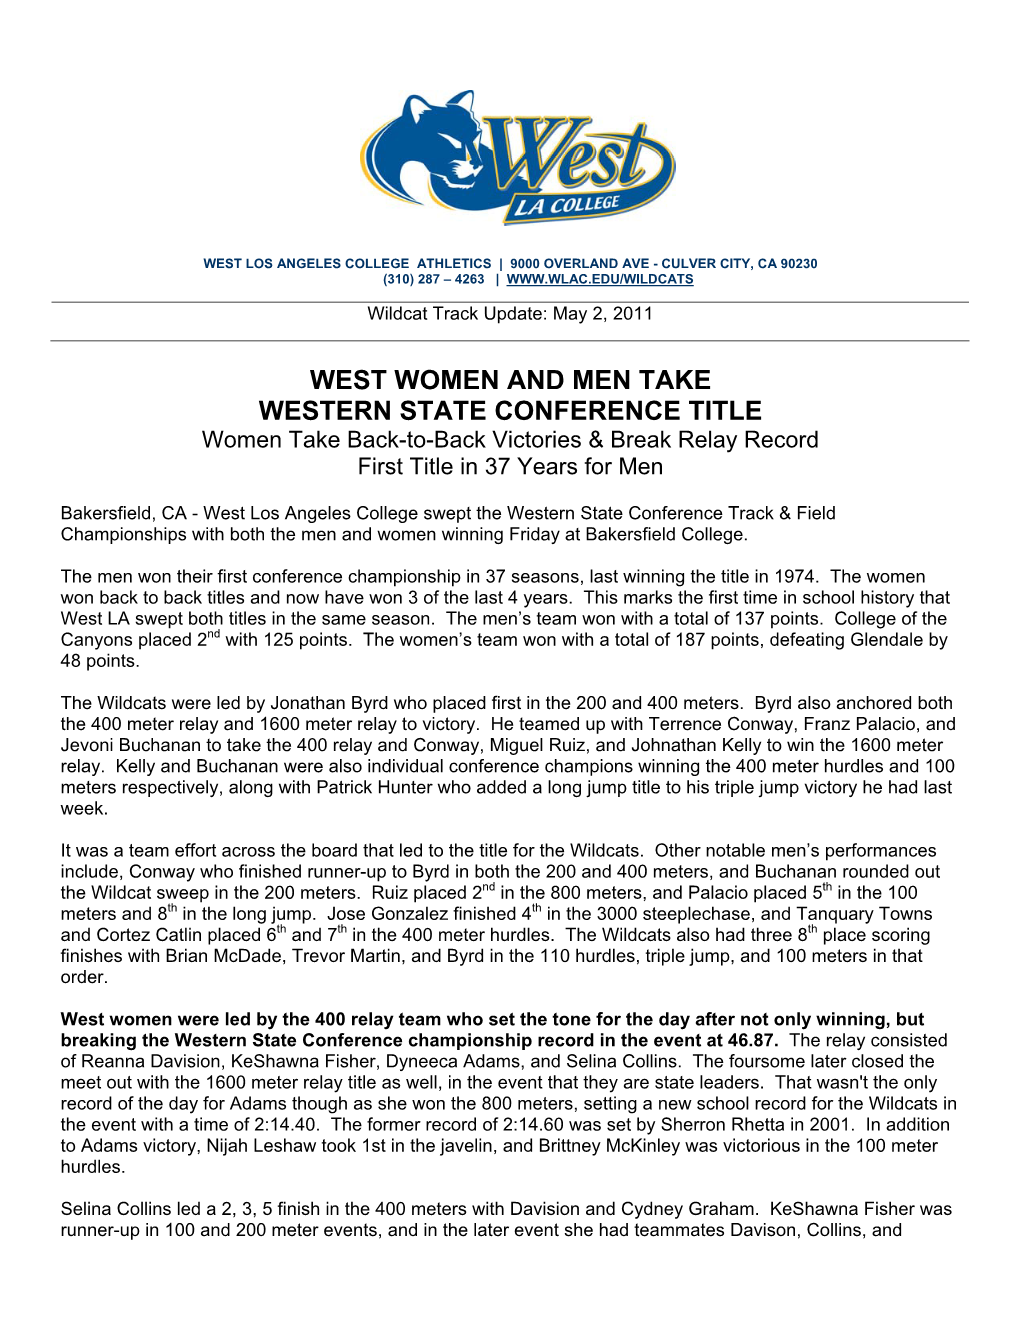 WEST WOMEN and MEN TAKE WESTERN STATE CONFERENCE TITLE Women Take Back-To-Back Victories & Break Relay Record First Title in 37 Years for Men